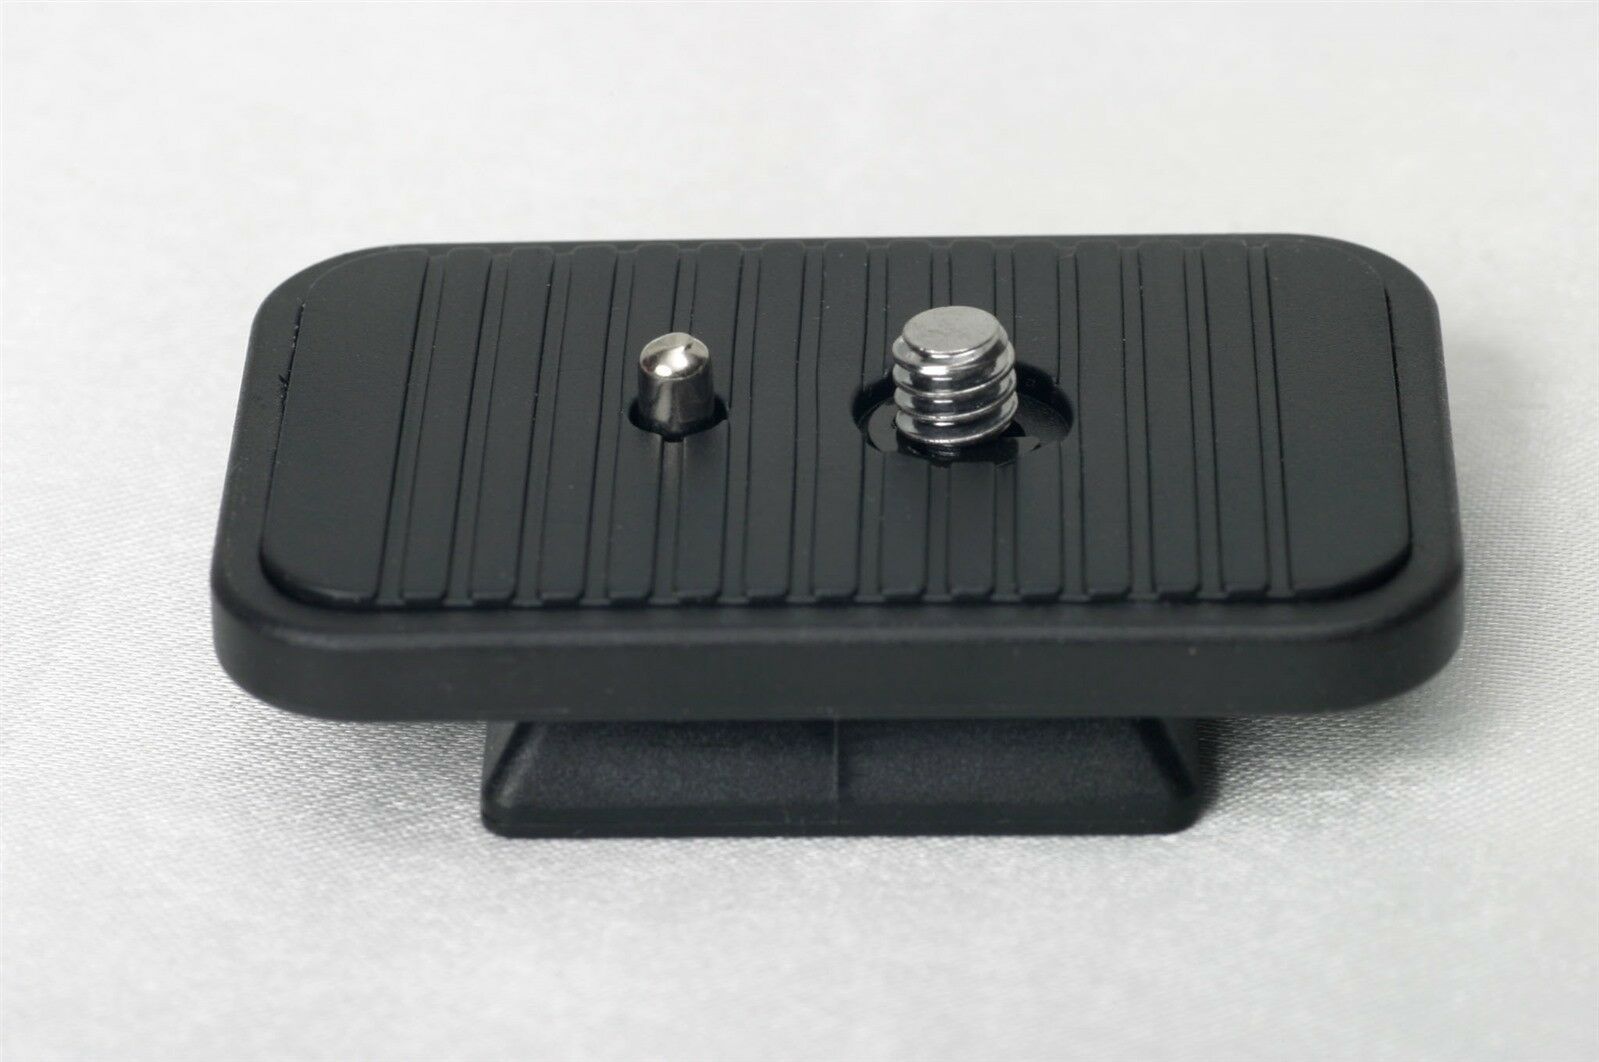 Targus Quick Release Plate for TG-54TR tripod ONLY